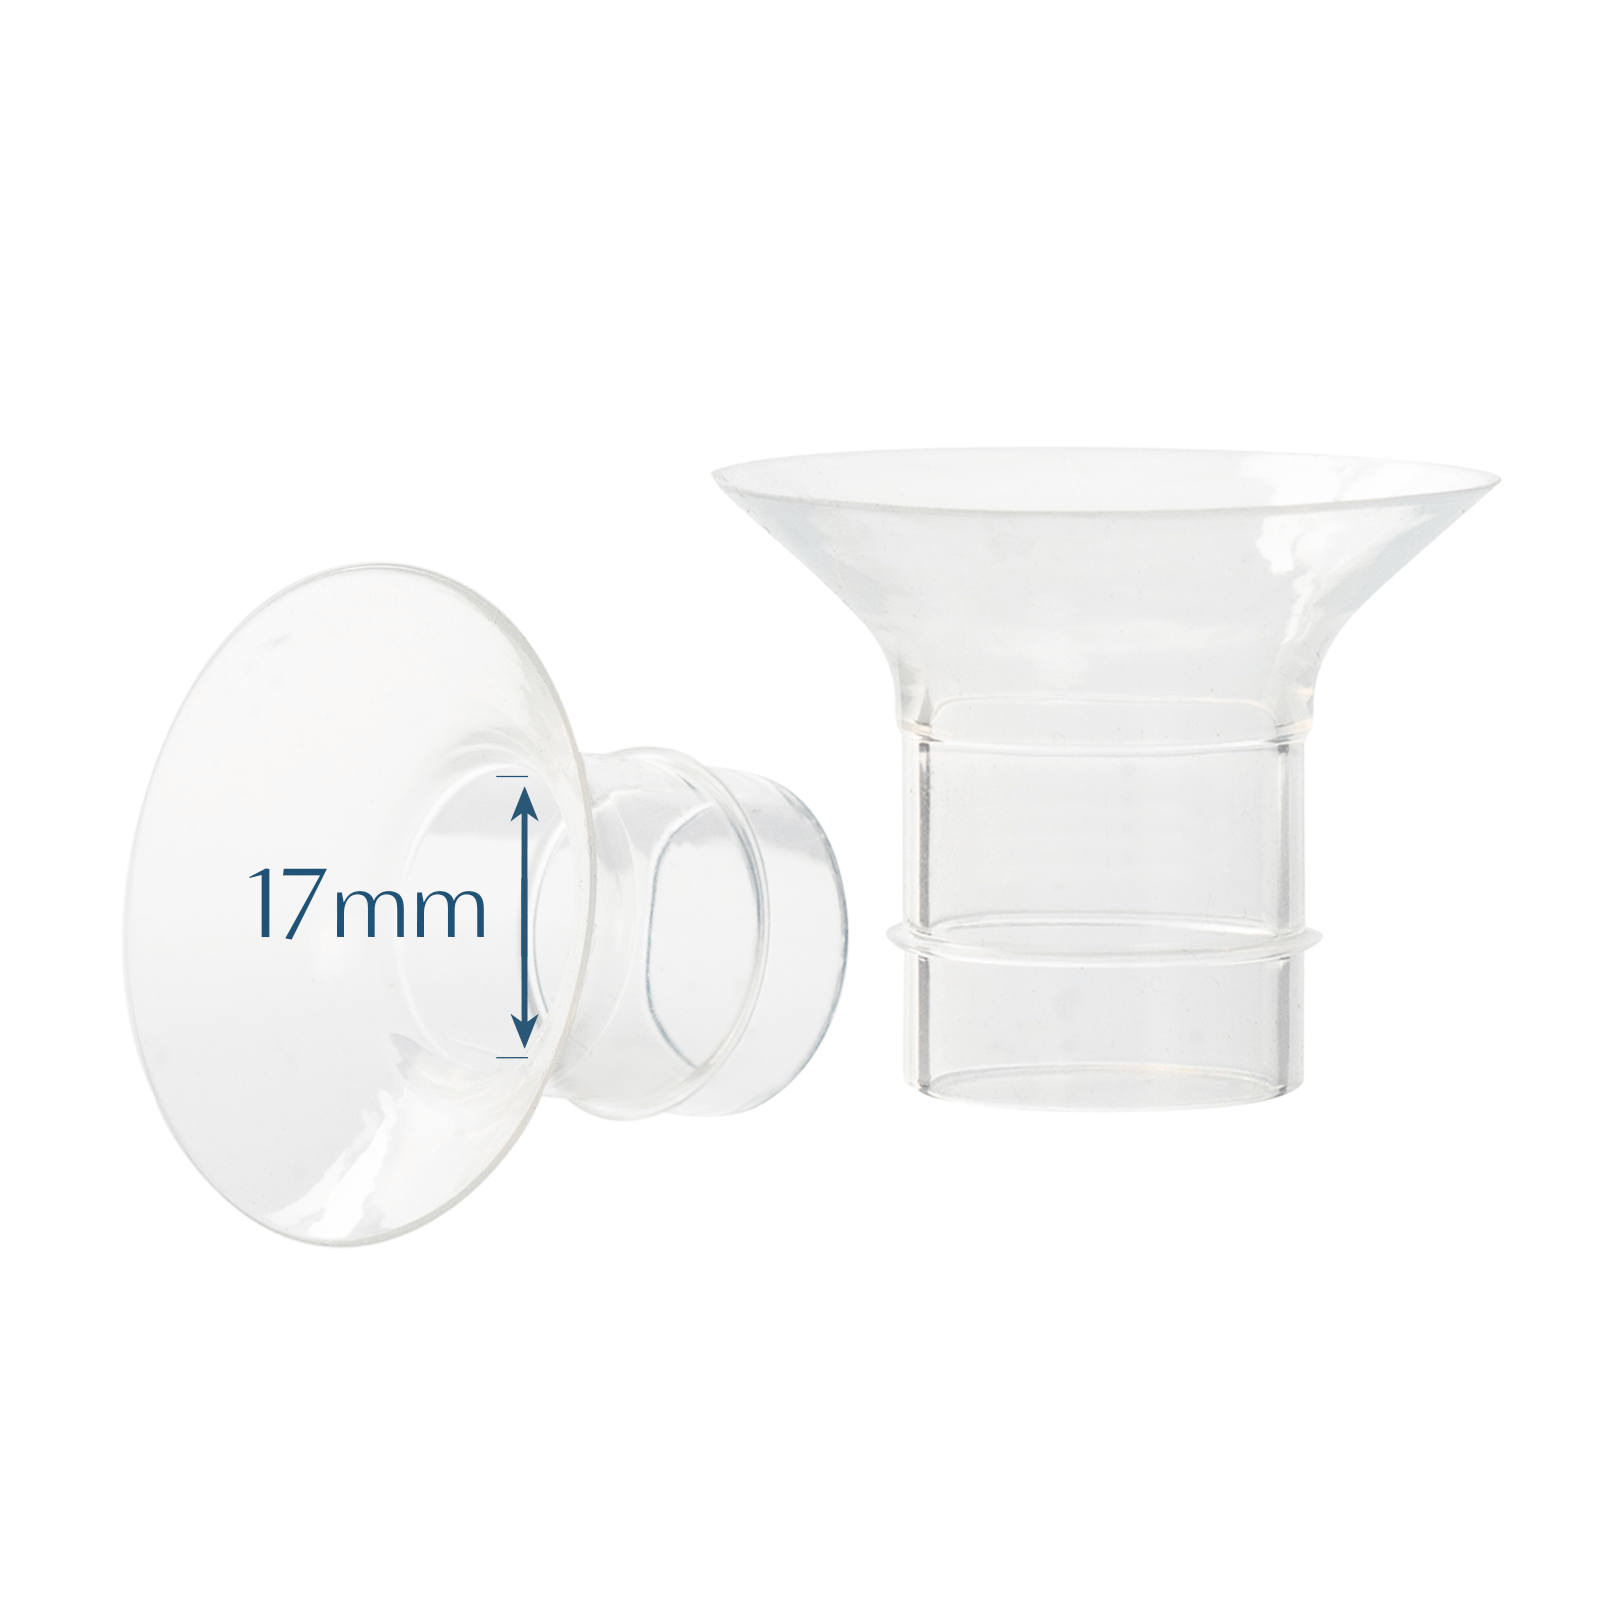 Pump-A-Collect Milk Collection Cups with Silicone Flanges